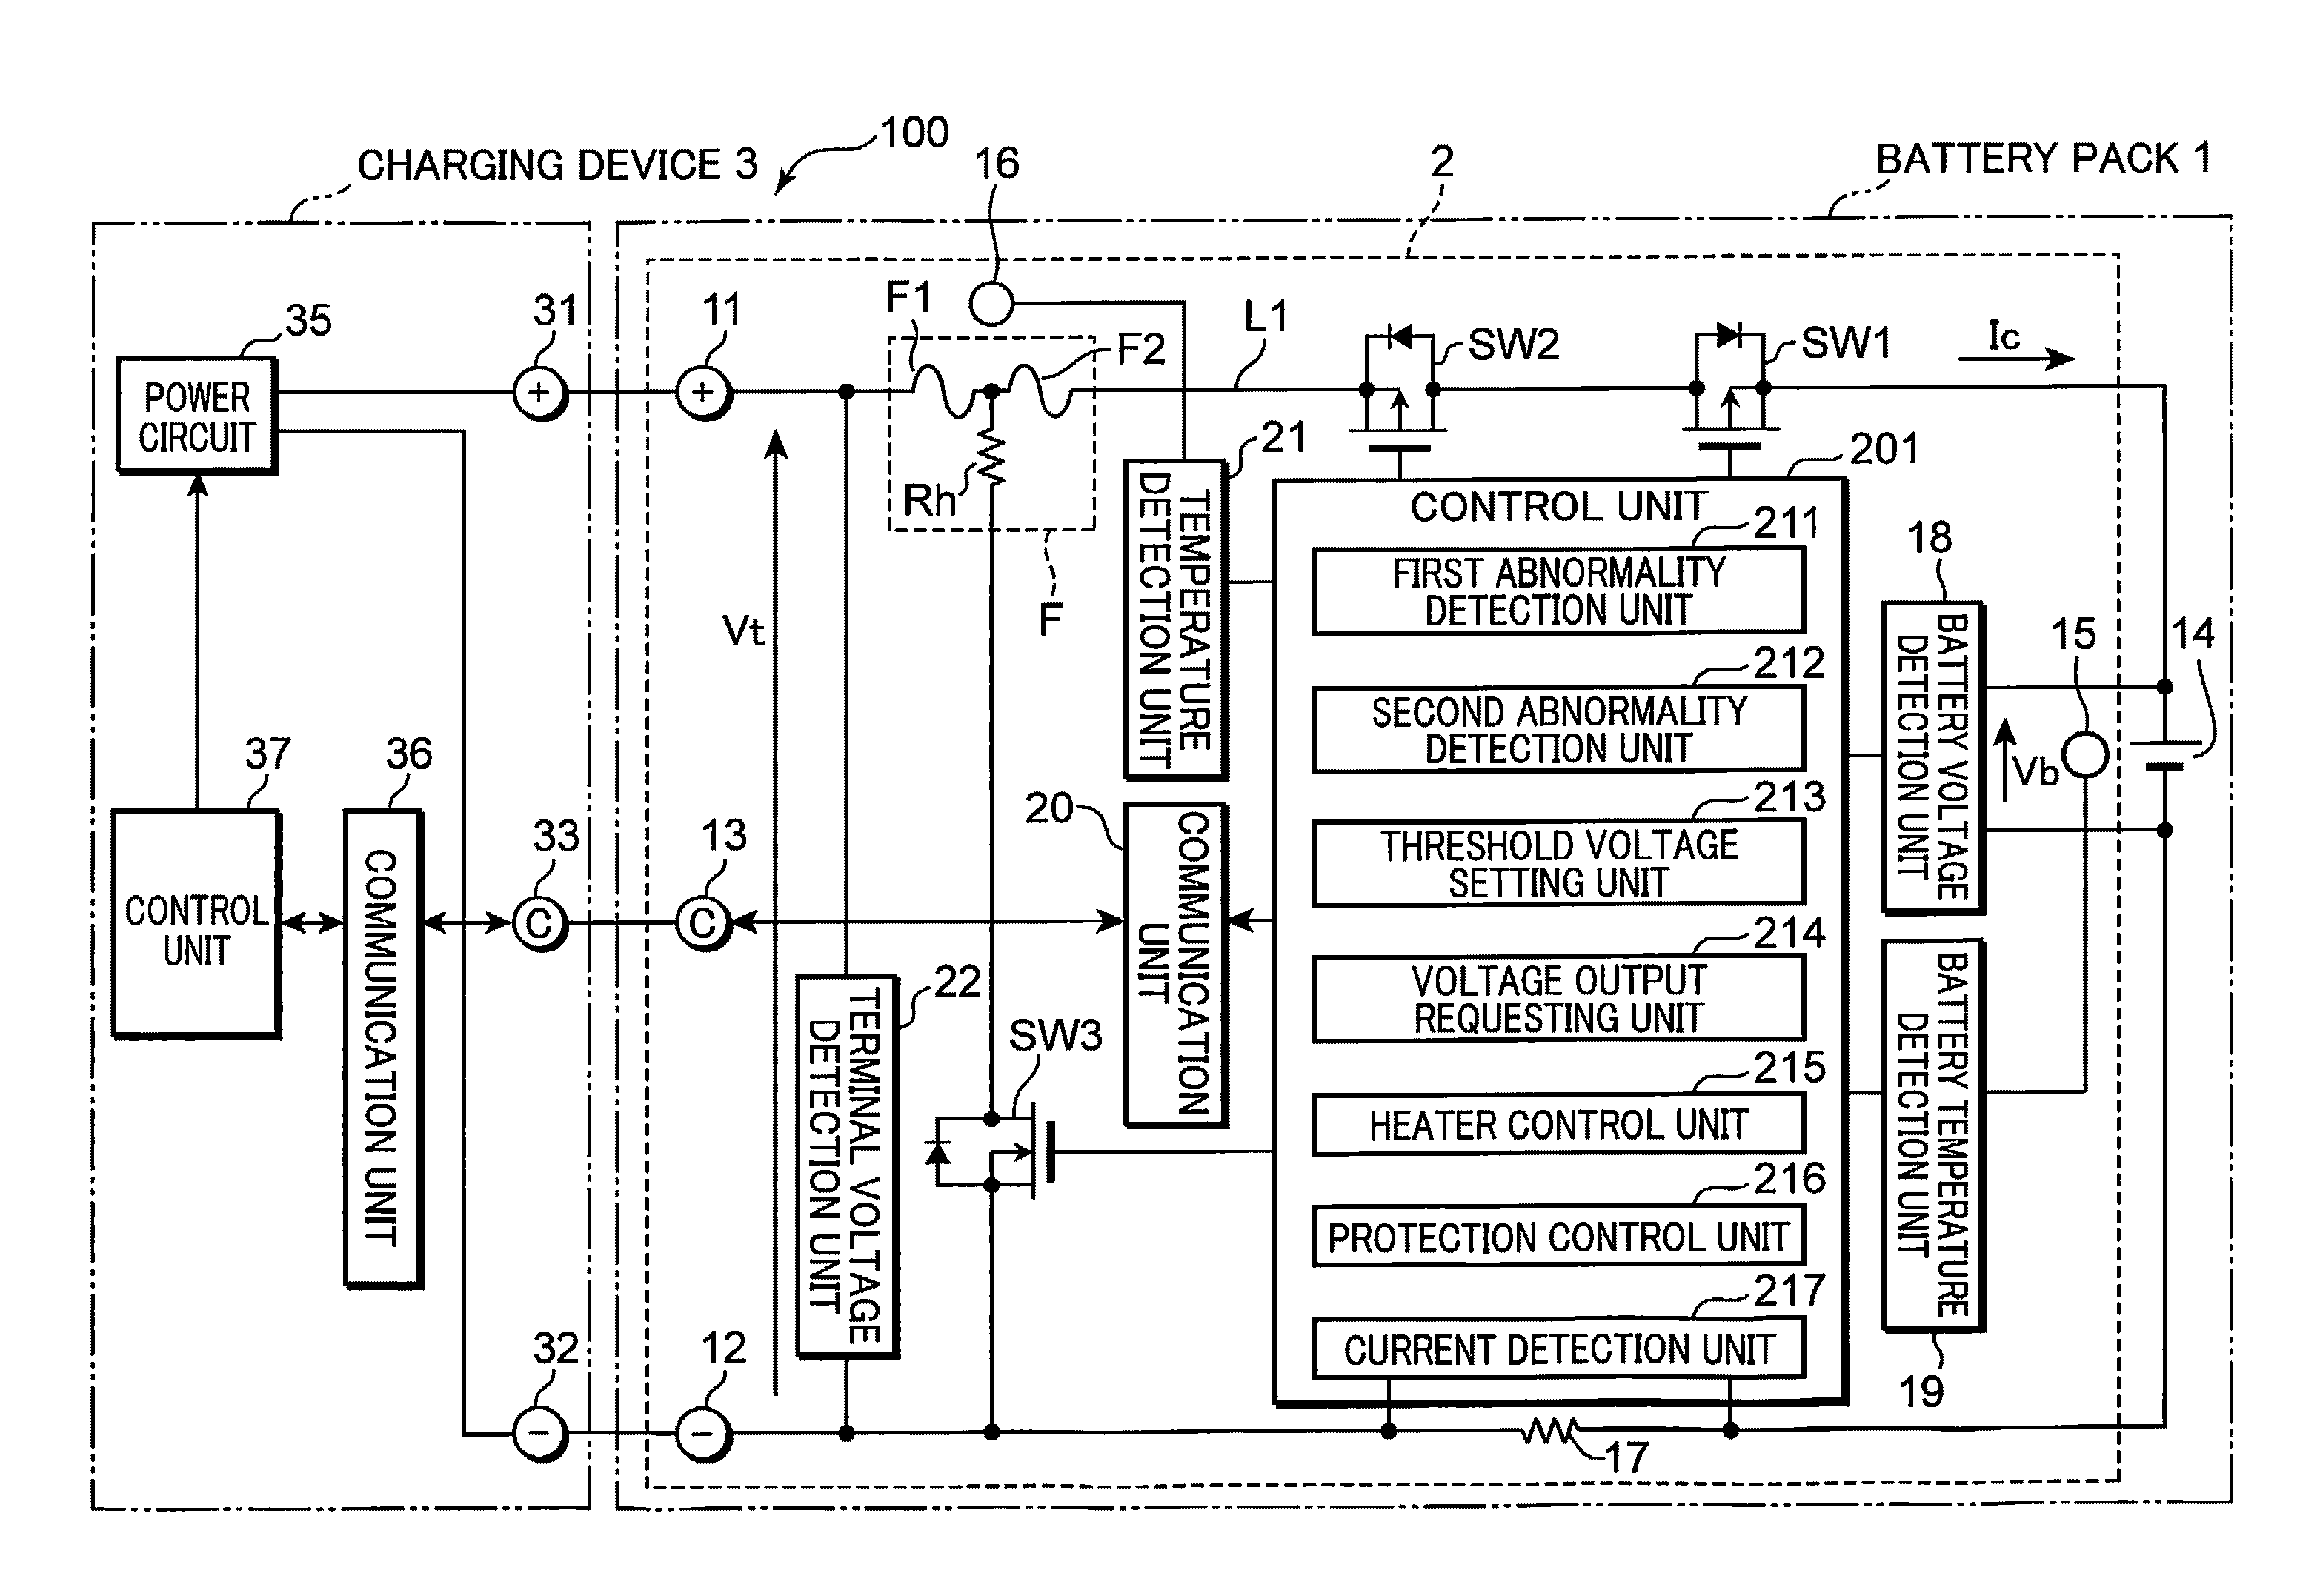 Protection circuit, battery pack and charging system